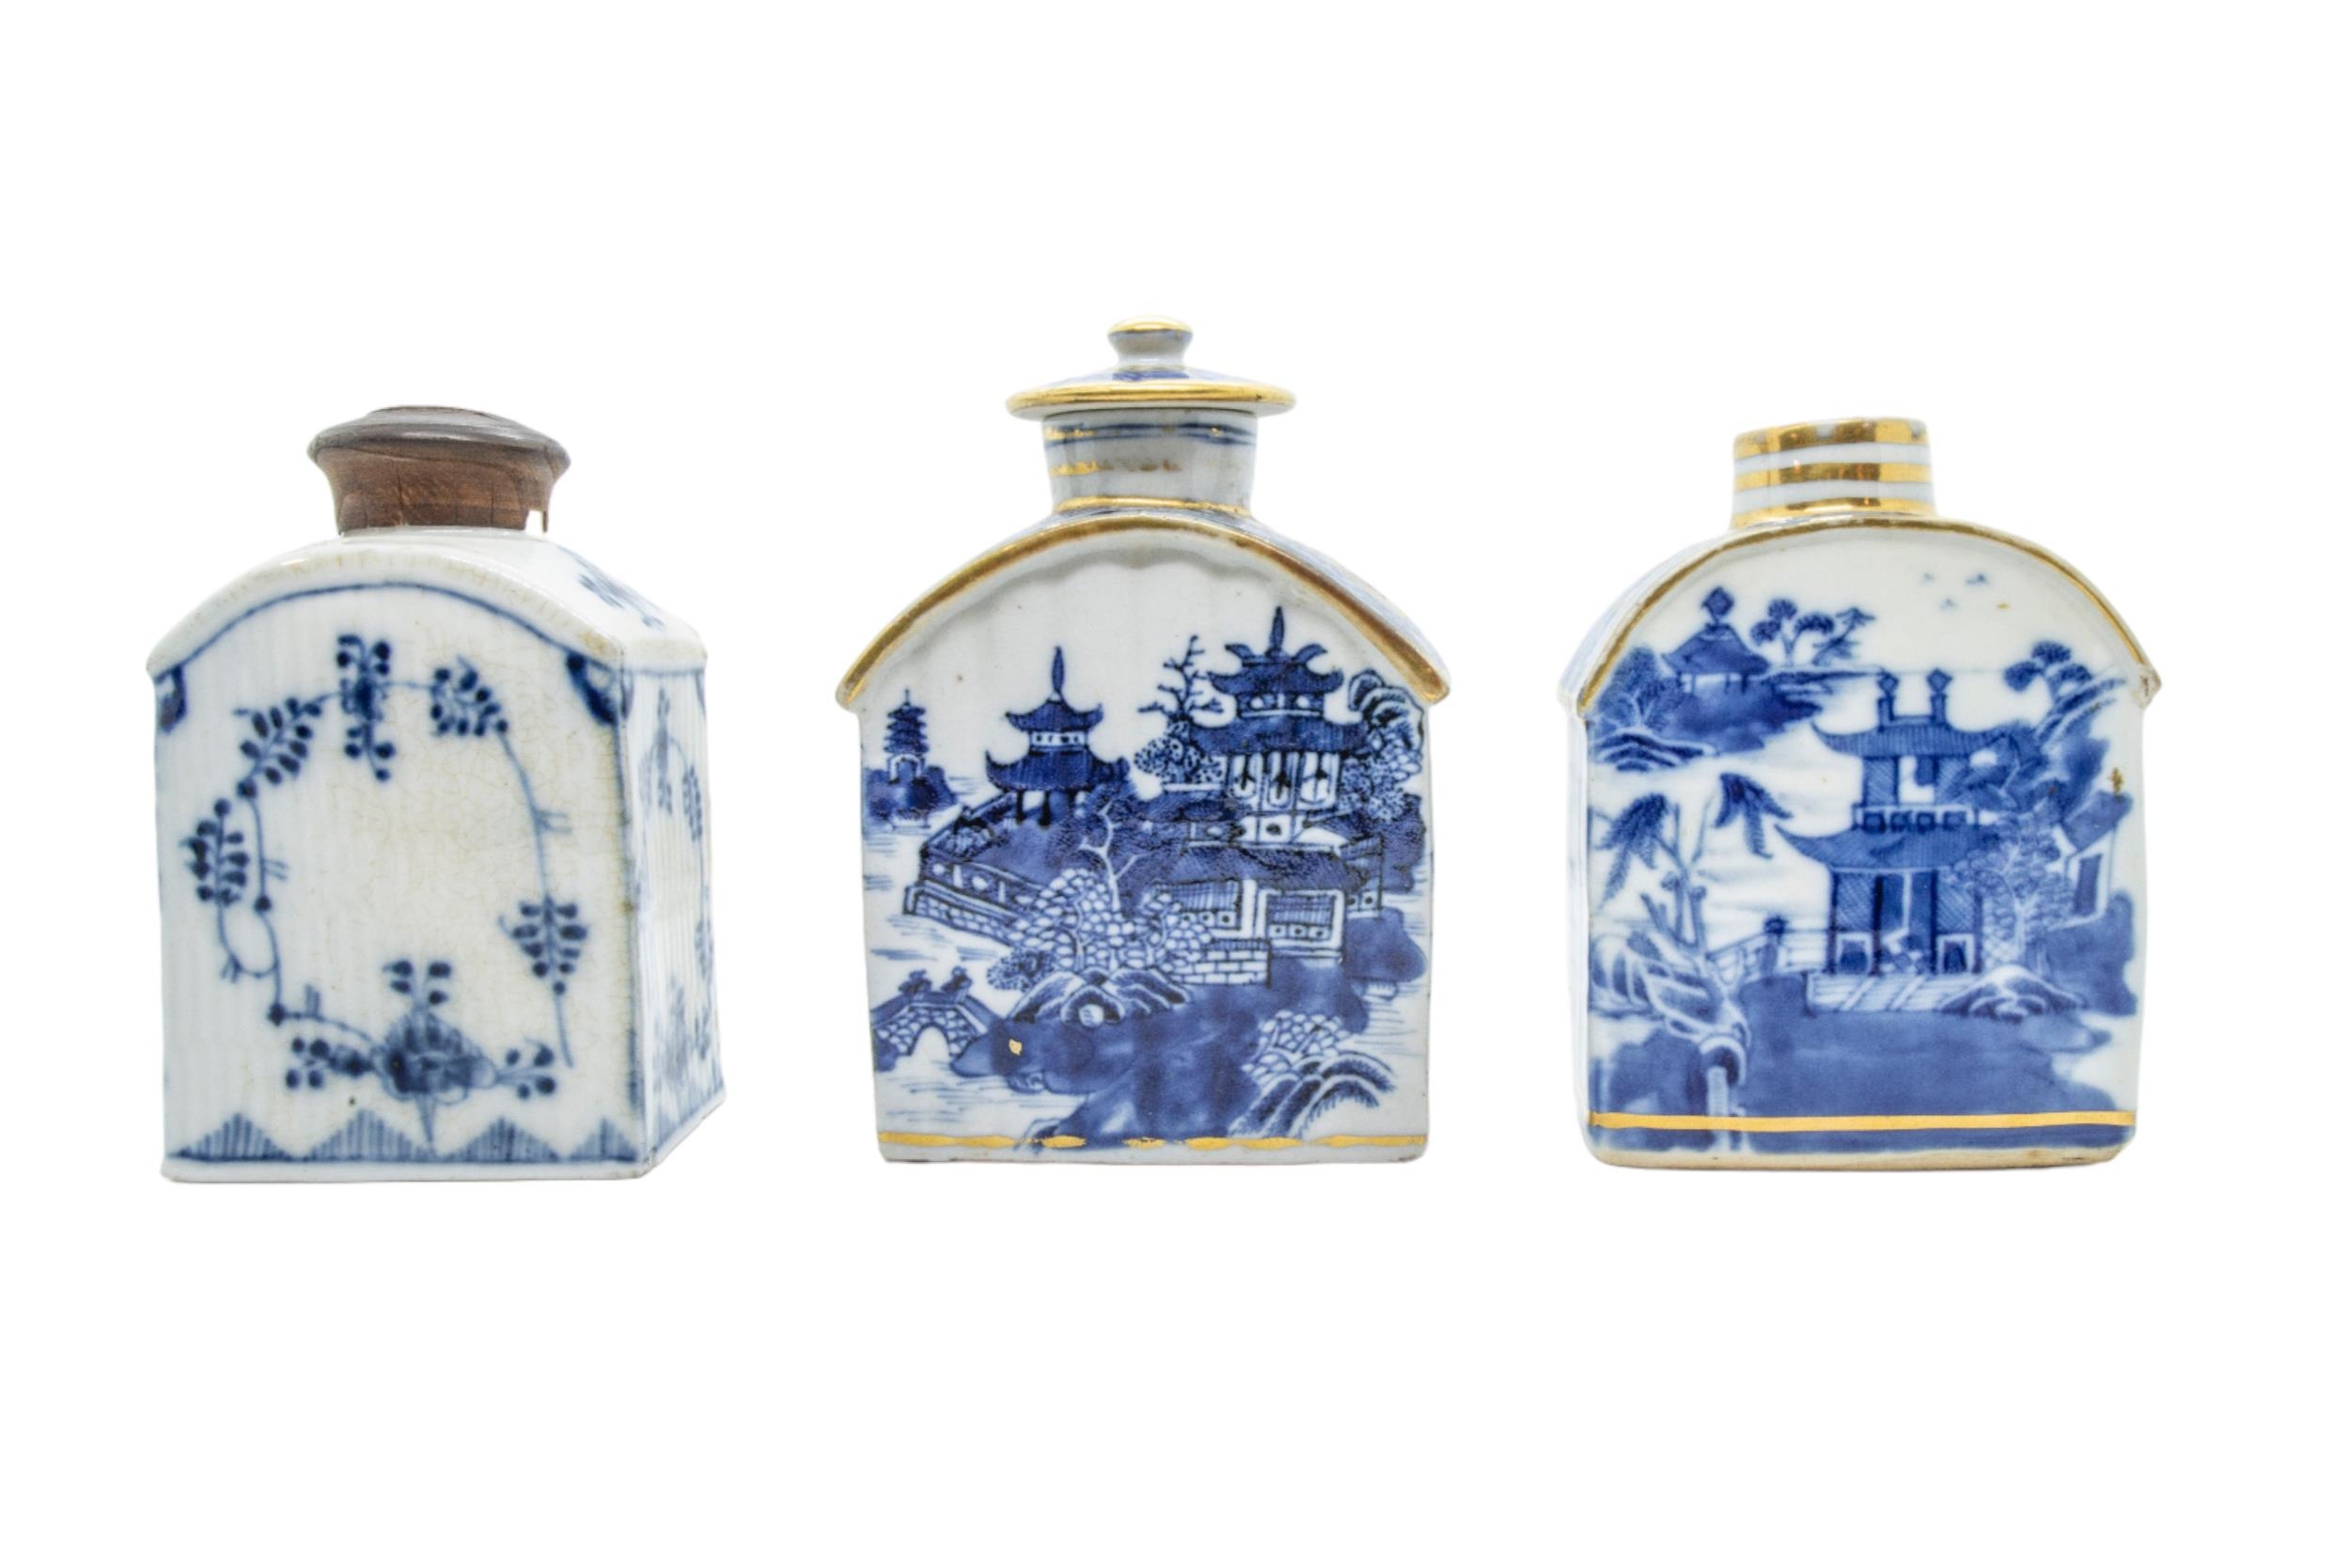 A MIXED GROUP OF EIGHT PORCELAIN TEA CADDIES, 18TH/19TH CENTURY, including two Imari pattern - Image 3 of 4